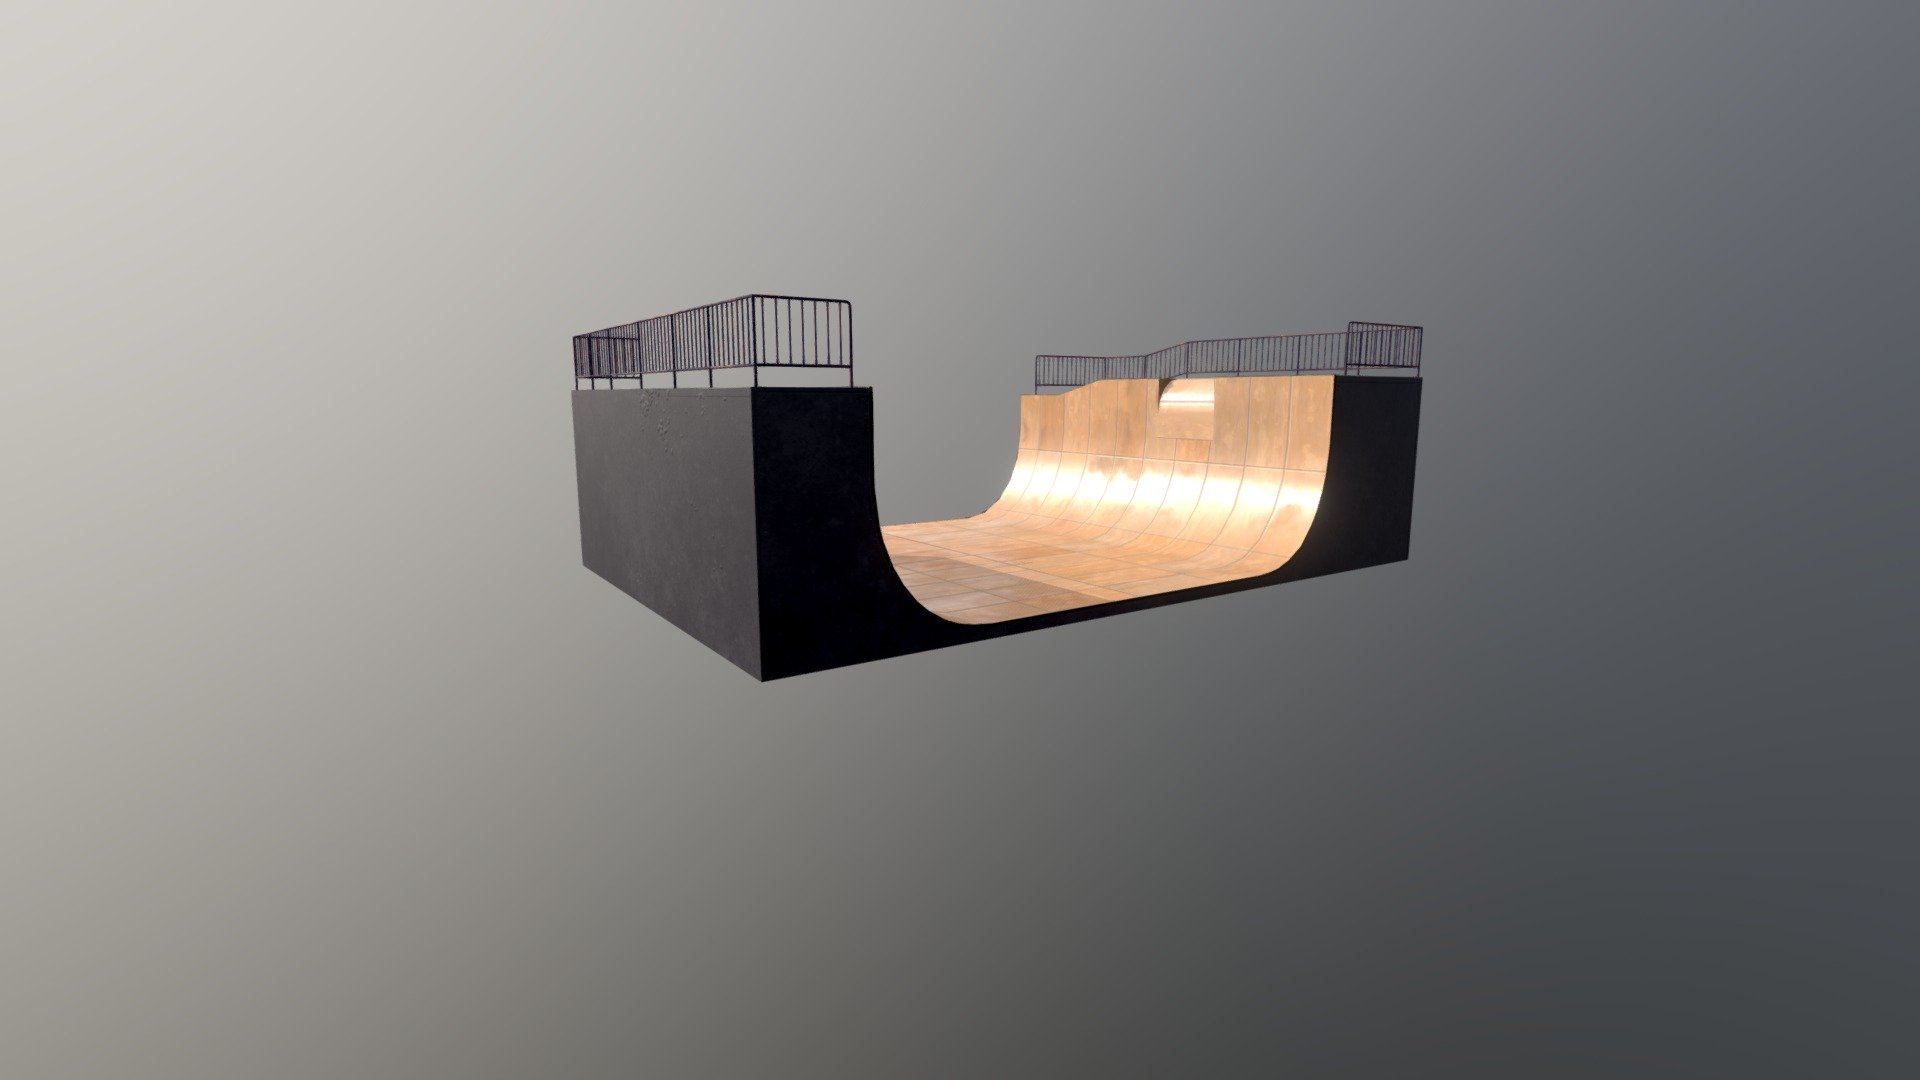 Inspired by Tony Hawk's Pro Skater and skate footage.
Went for a kind of modern and high quality ramp design but small enough to feel local.

Rendered in Unreal Engine 5

The boards are a tillable texture, the rest is painted 3d model